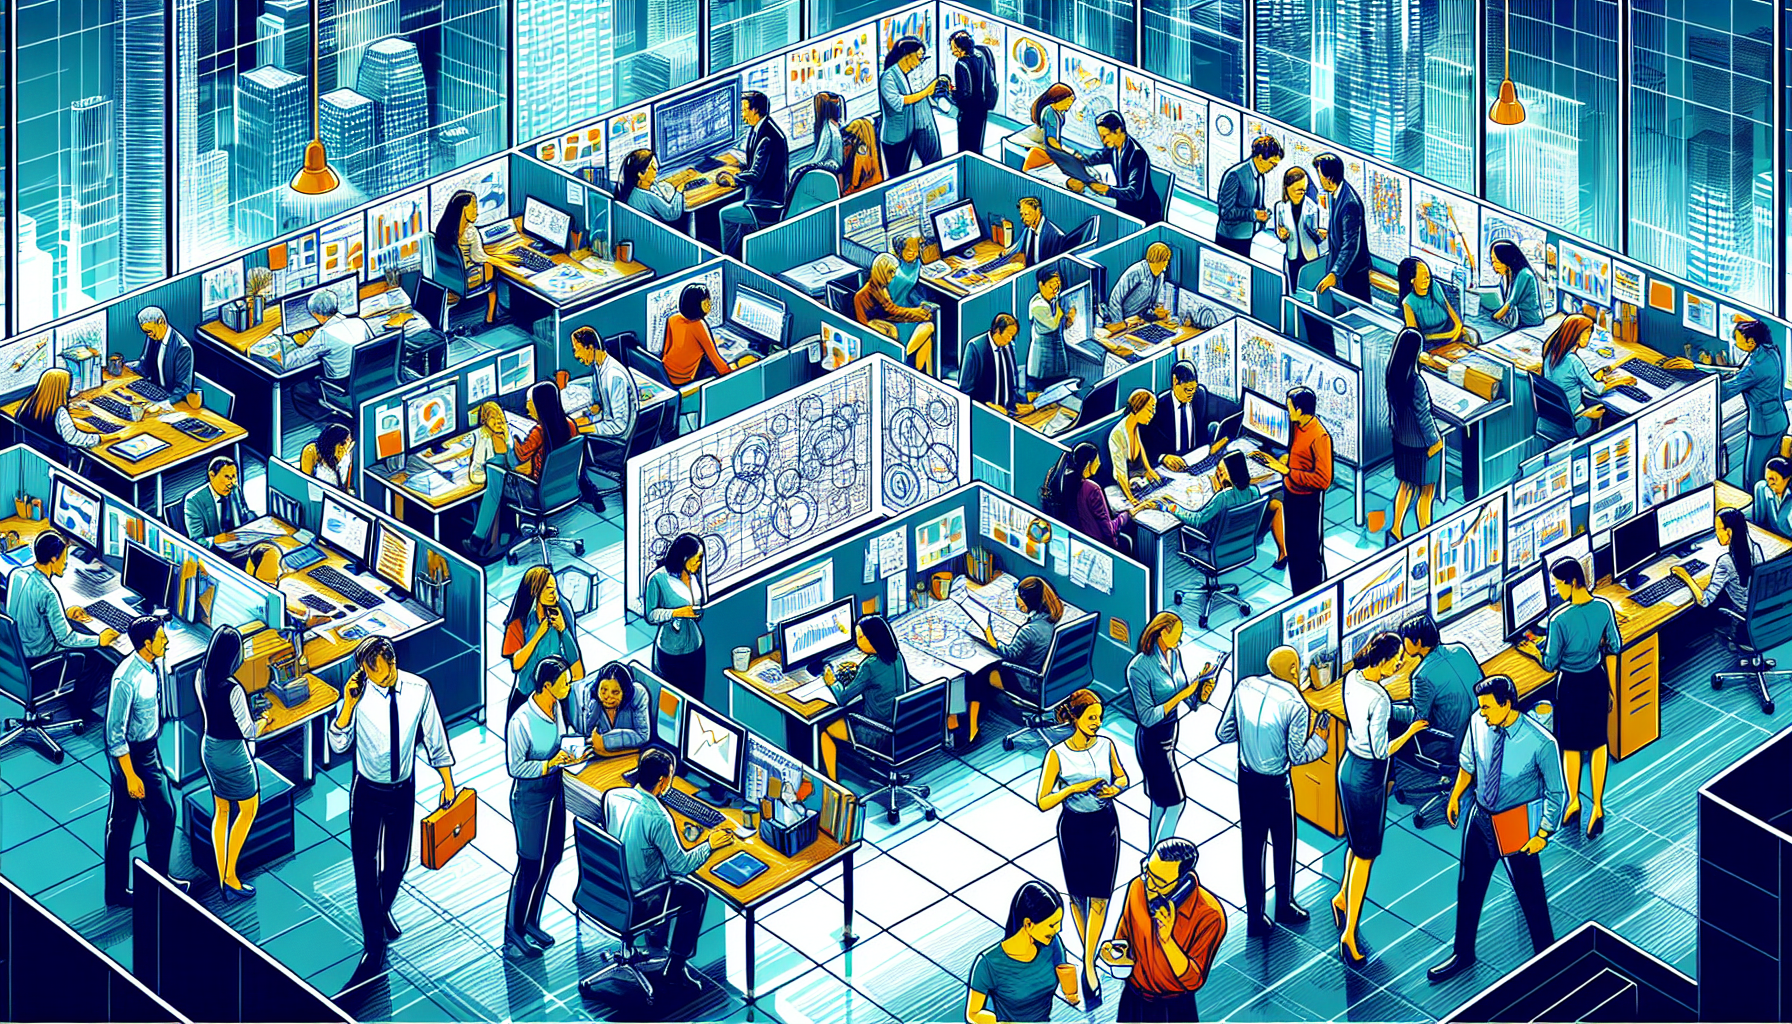 Illustration of a busy office with employees working on various tasks